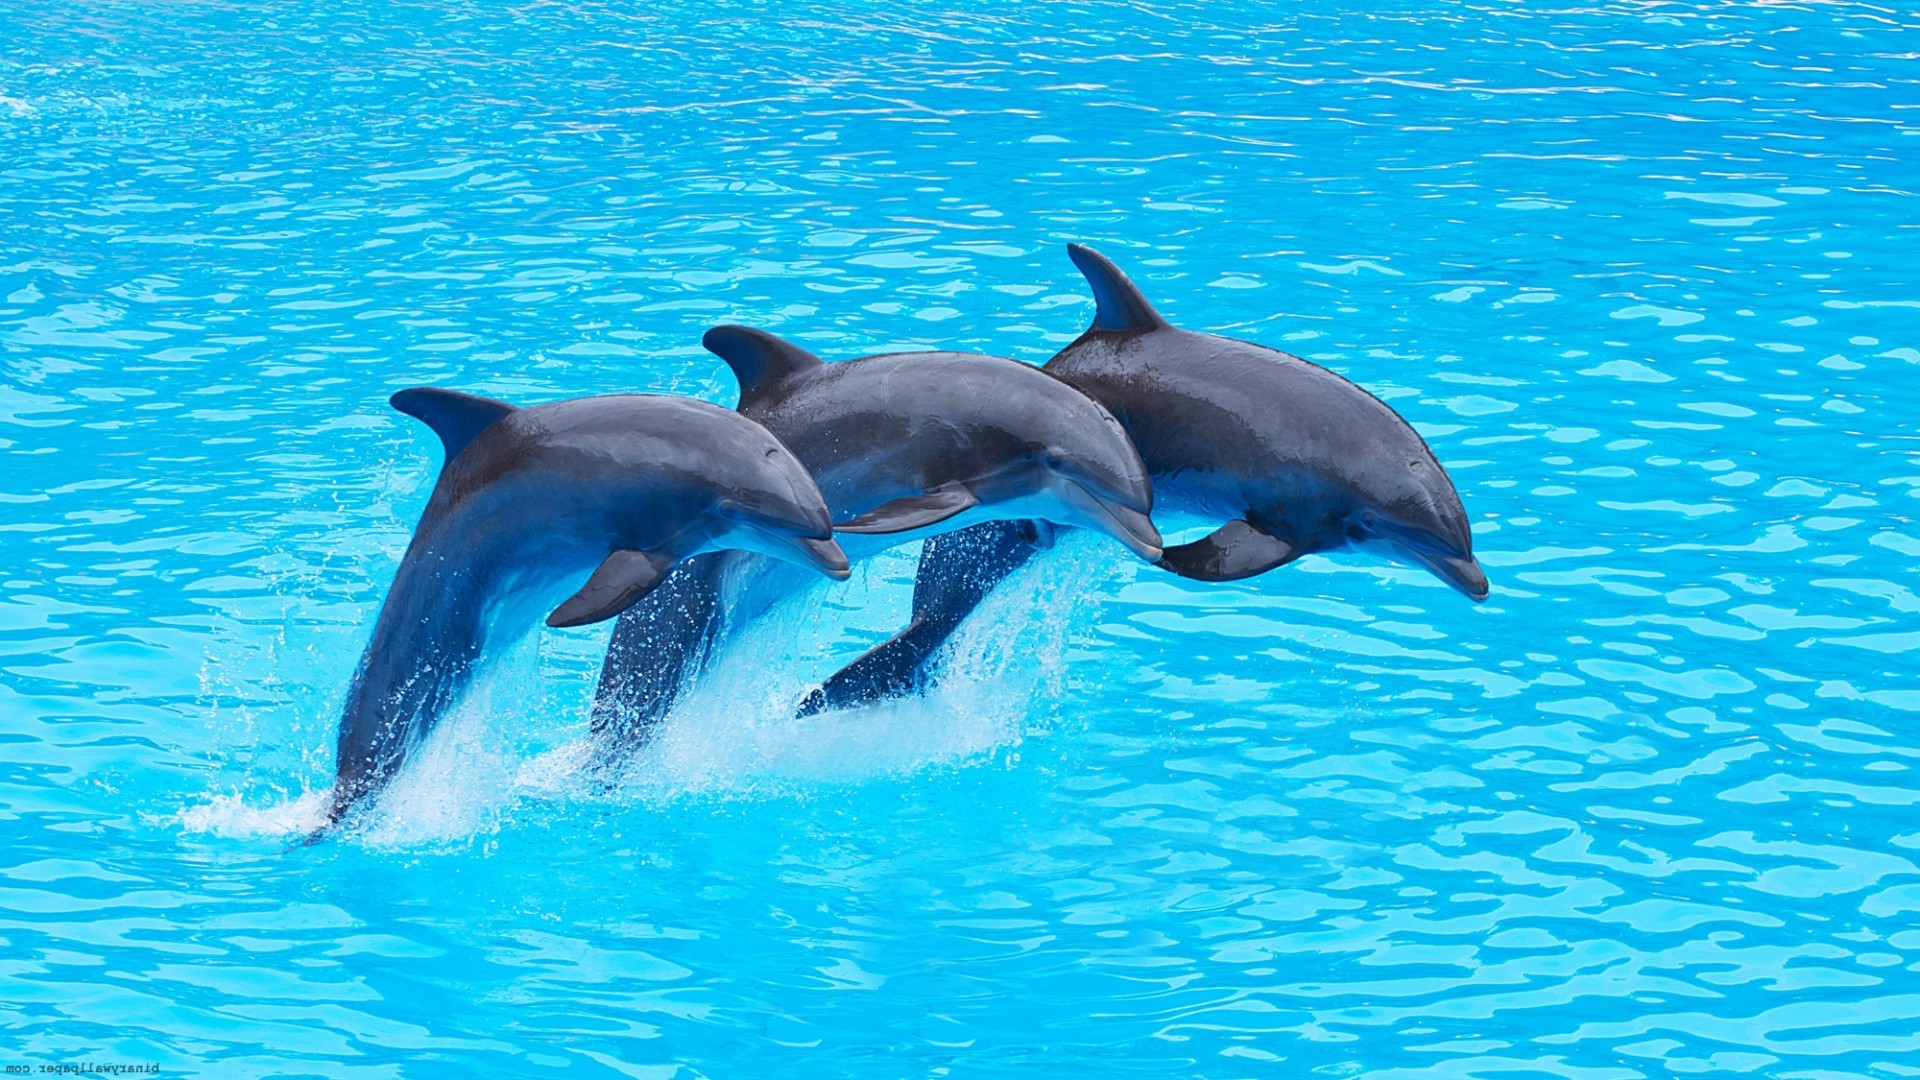 A picture of dolphins jumping out of water